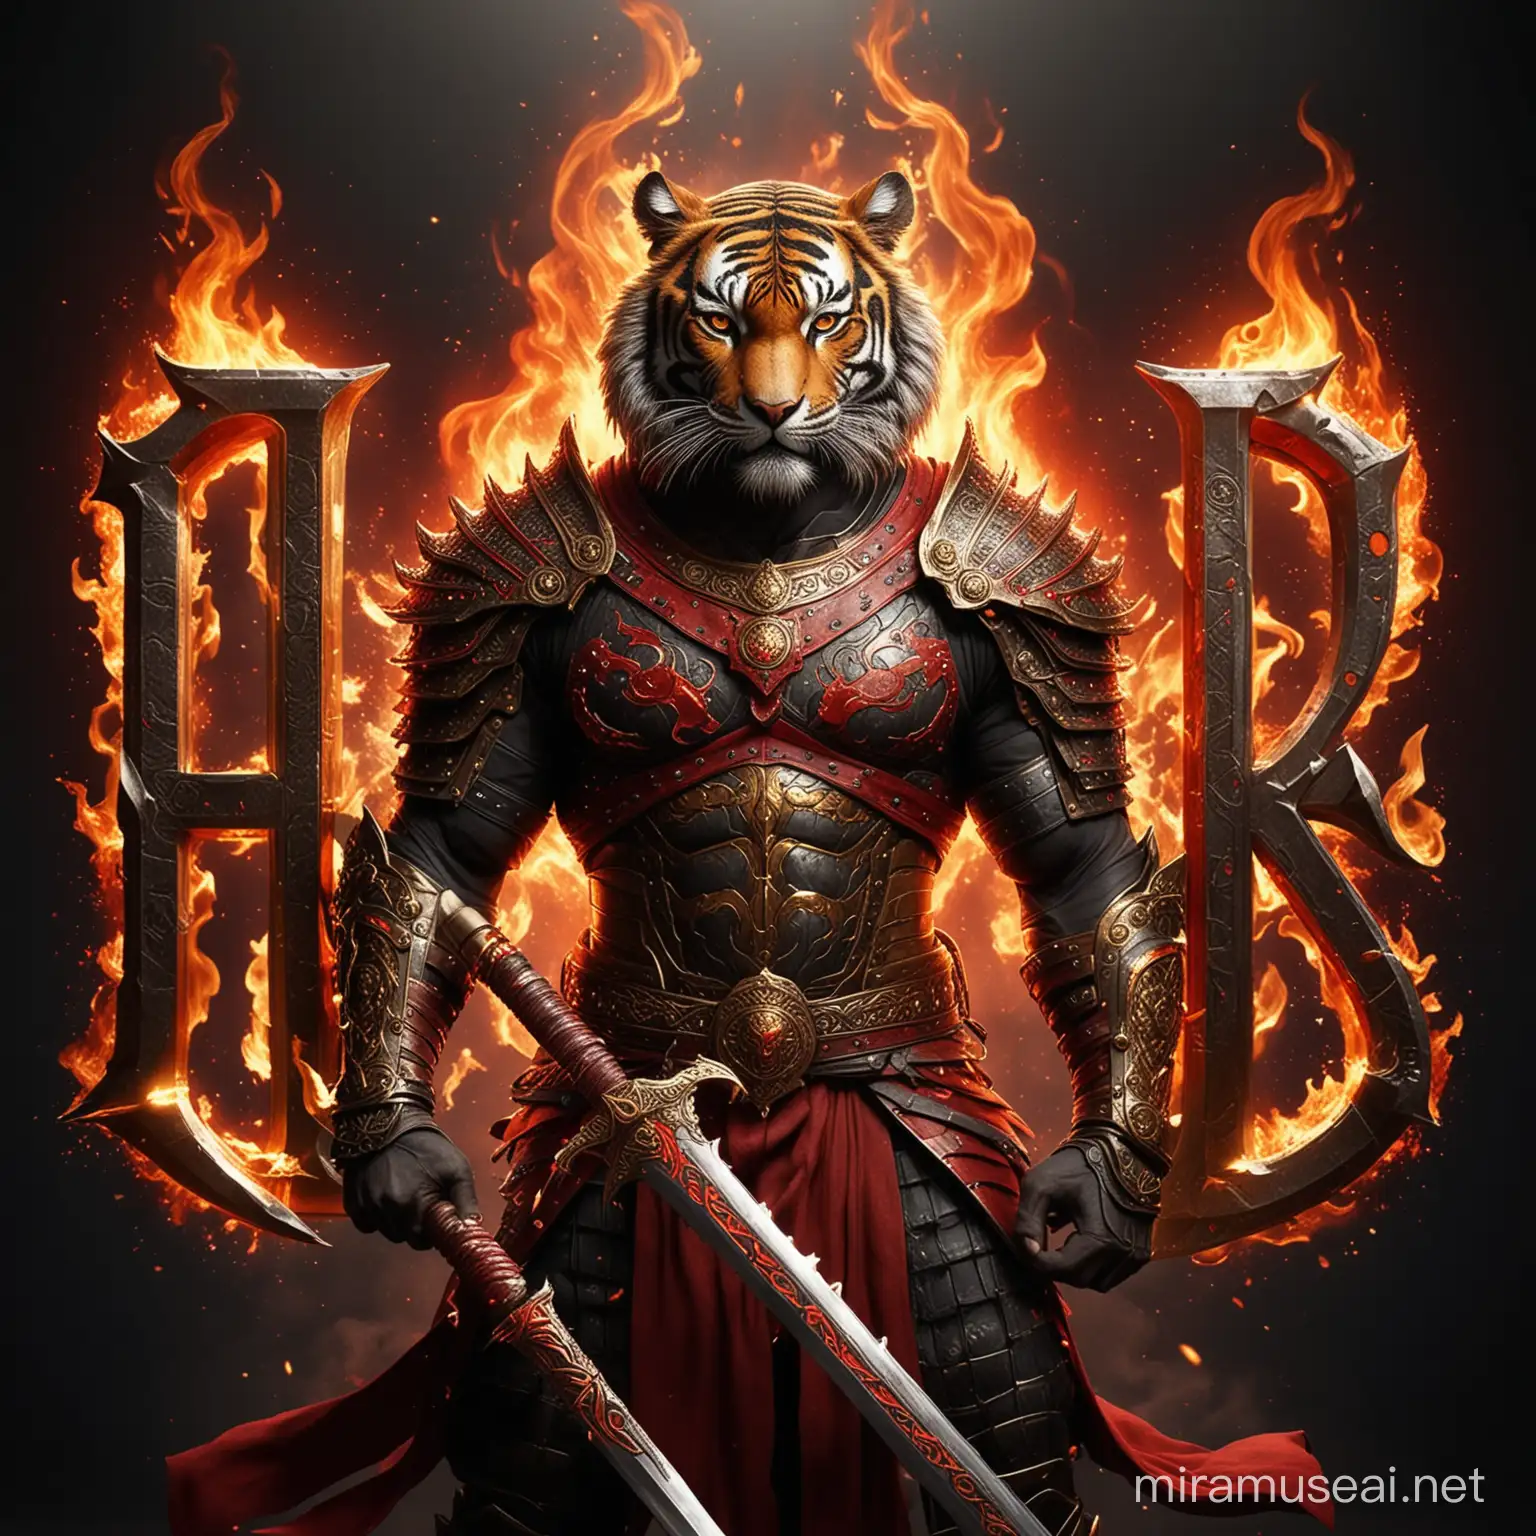 create a highly realistic image of TIger warrior wearing armor holding a flaming sword surrounded in red and rich logo with a shiny , as the centerpiece. Decorate the letters with shiny red and shiny fire with intricate details wrapping around each letter. The background black screen. include the text 'BLACK TIGER' in gold capital letters on a base, 64k ultra hd resolution